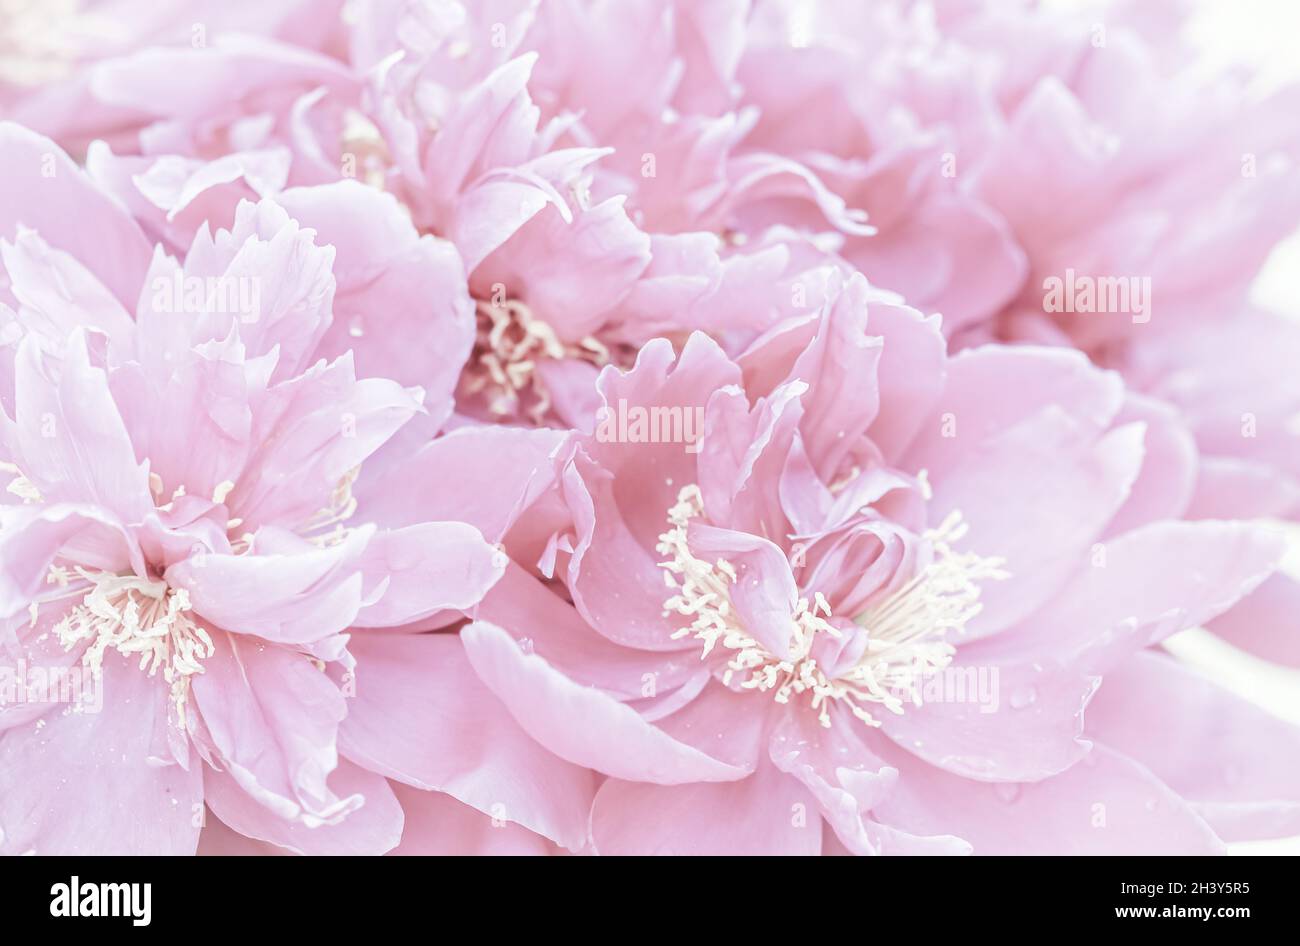 Soft focus, abstract floral background, pale pink peony flower petals Stock Photo